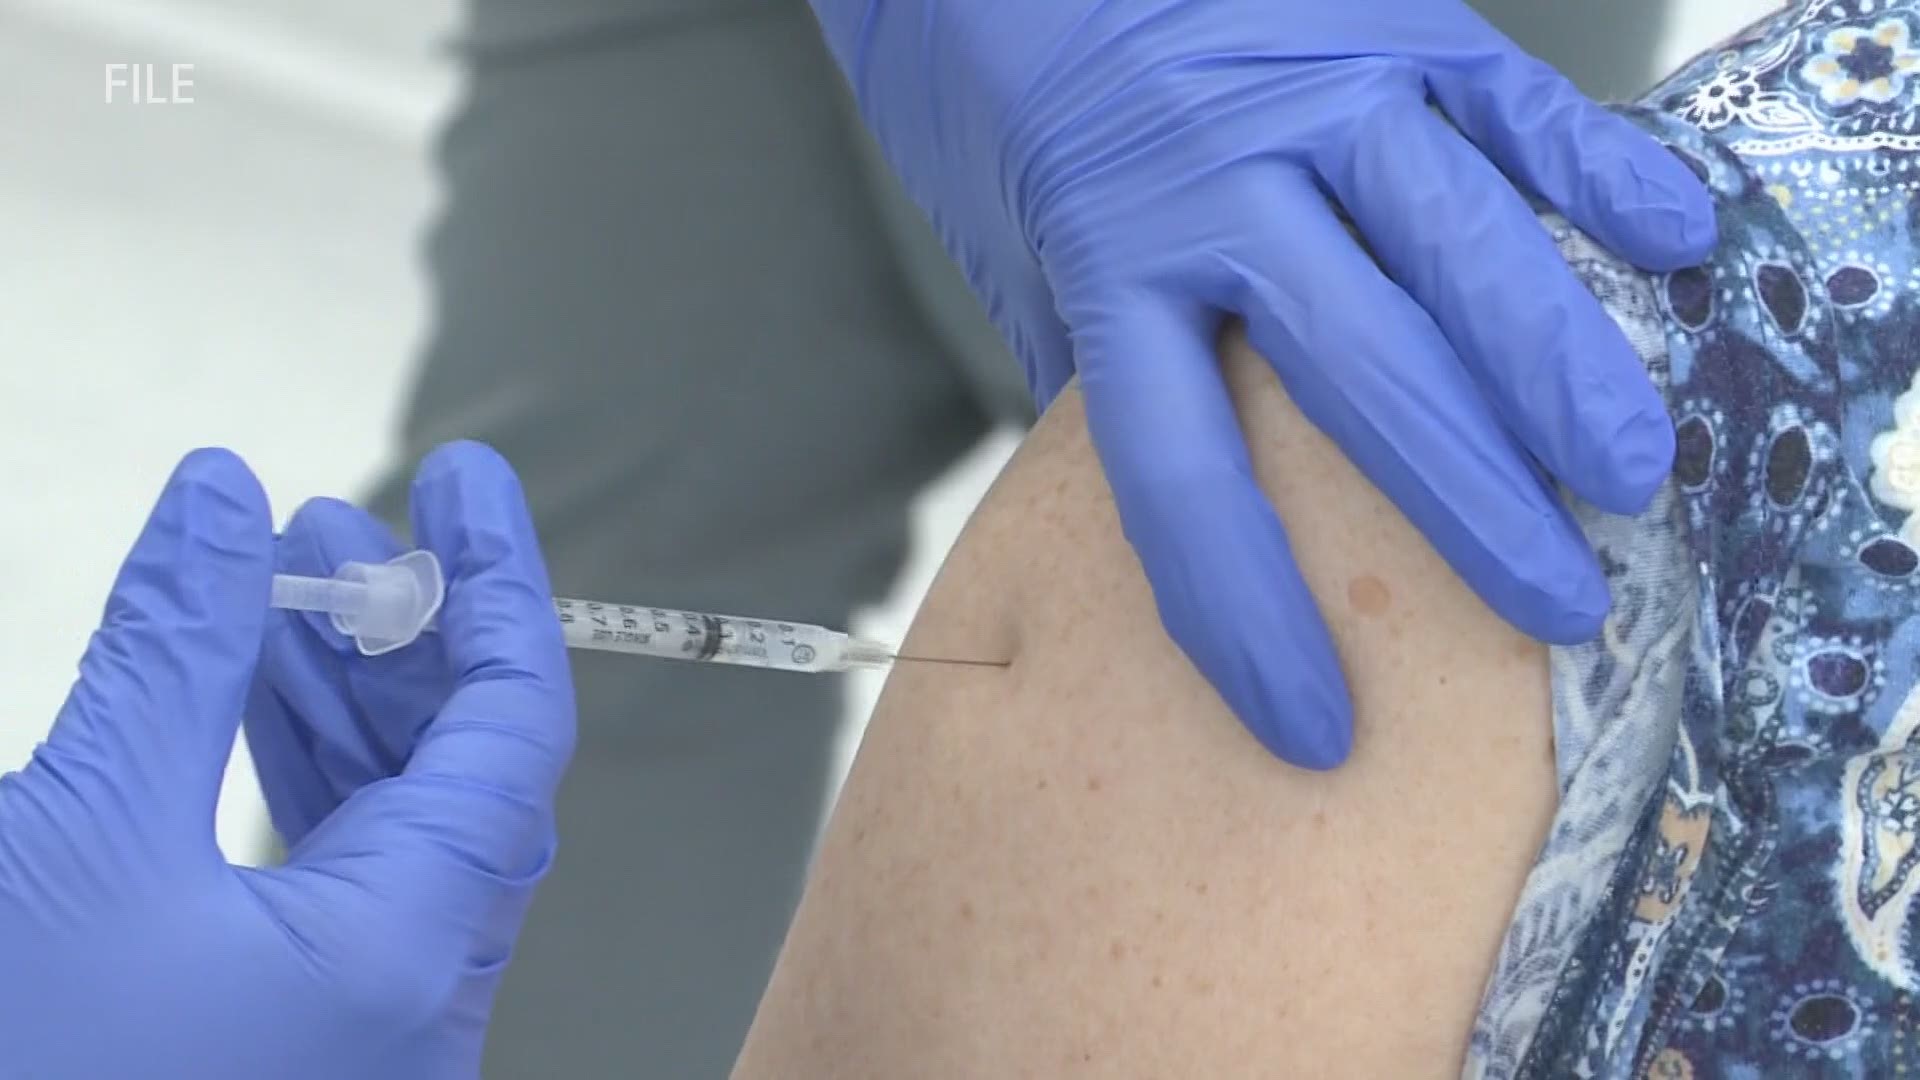 According to the state, only 10% of Michiganders have gotten the first dose of the COVID-19 vaccine.